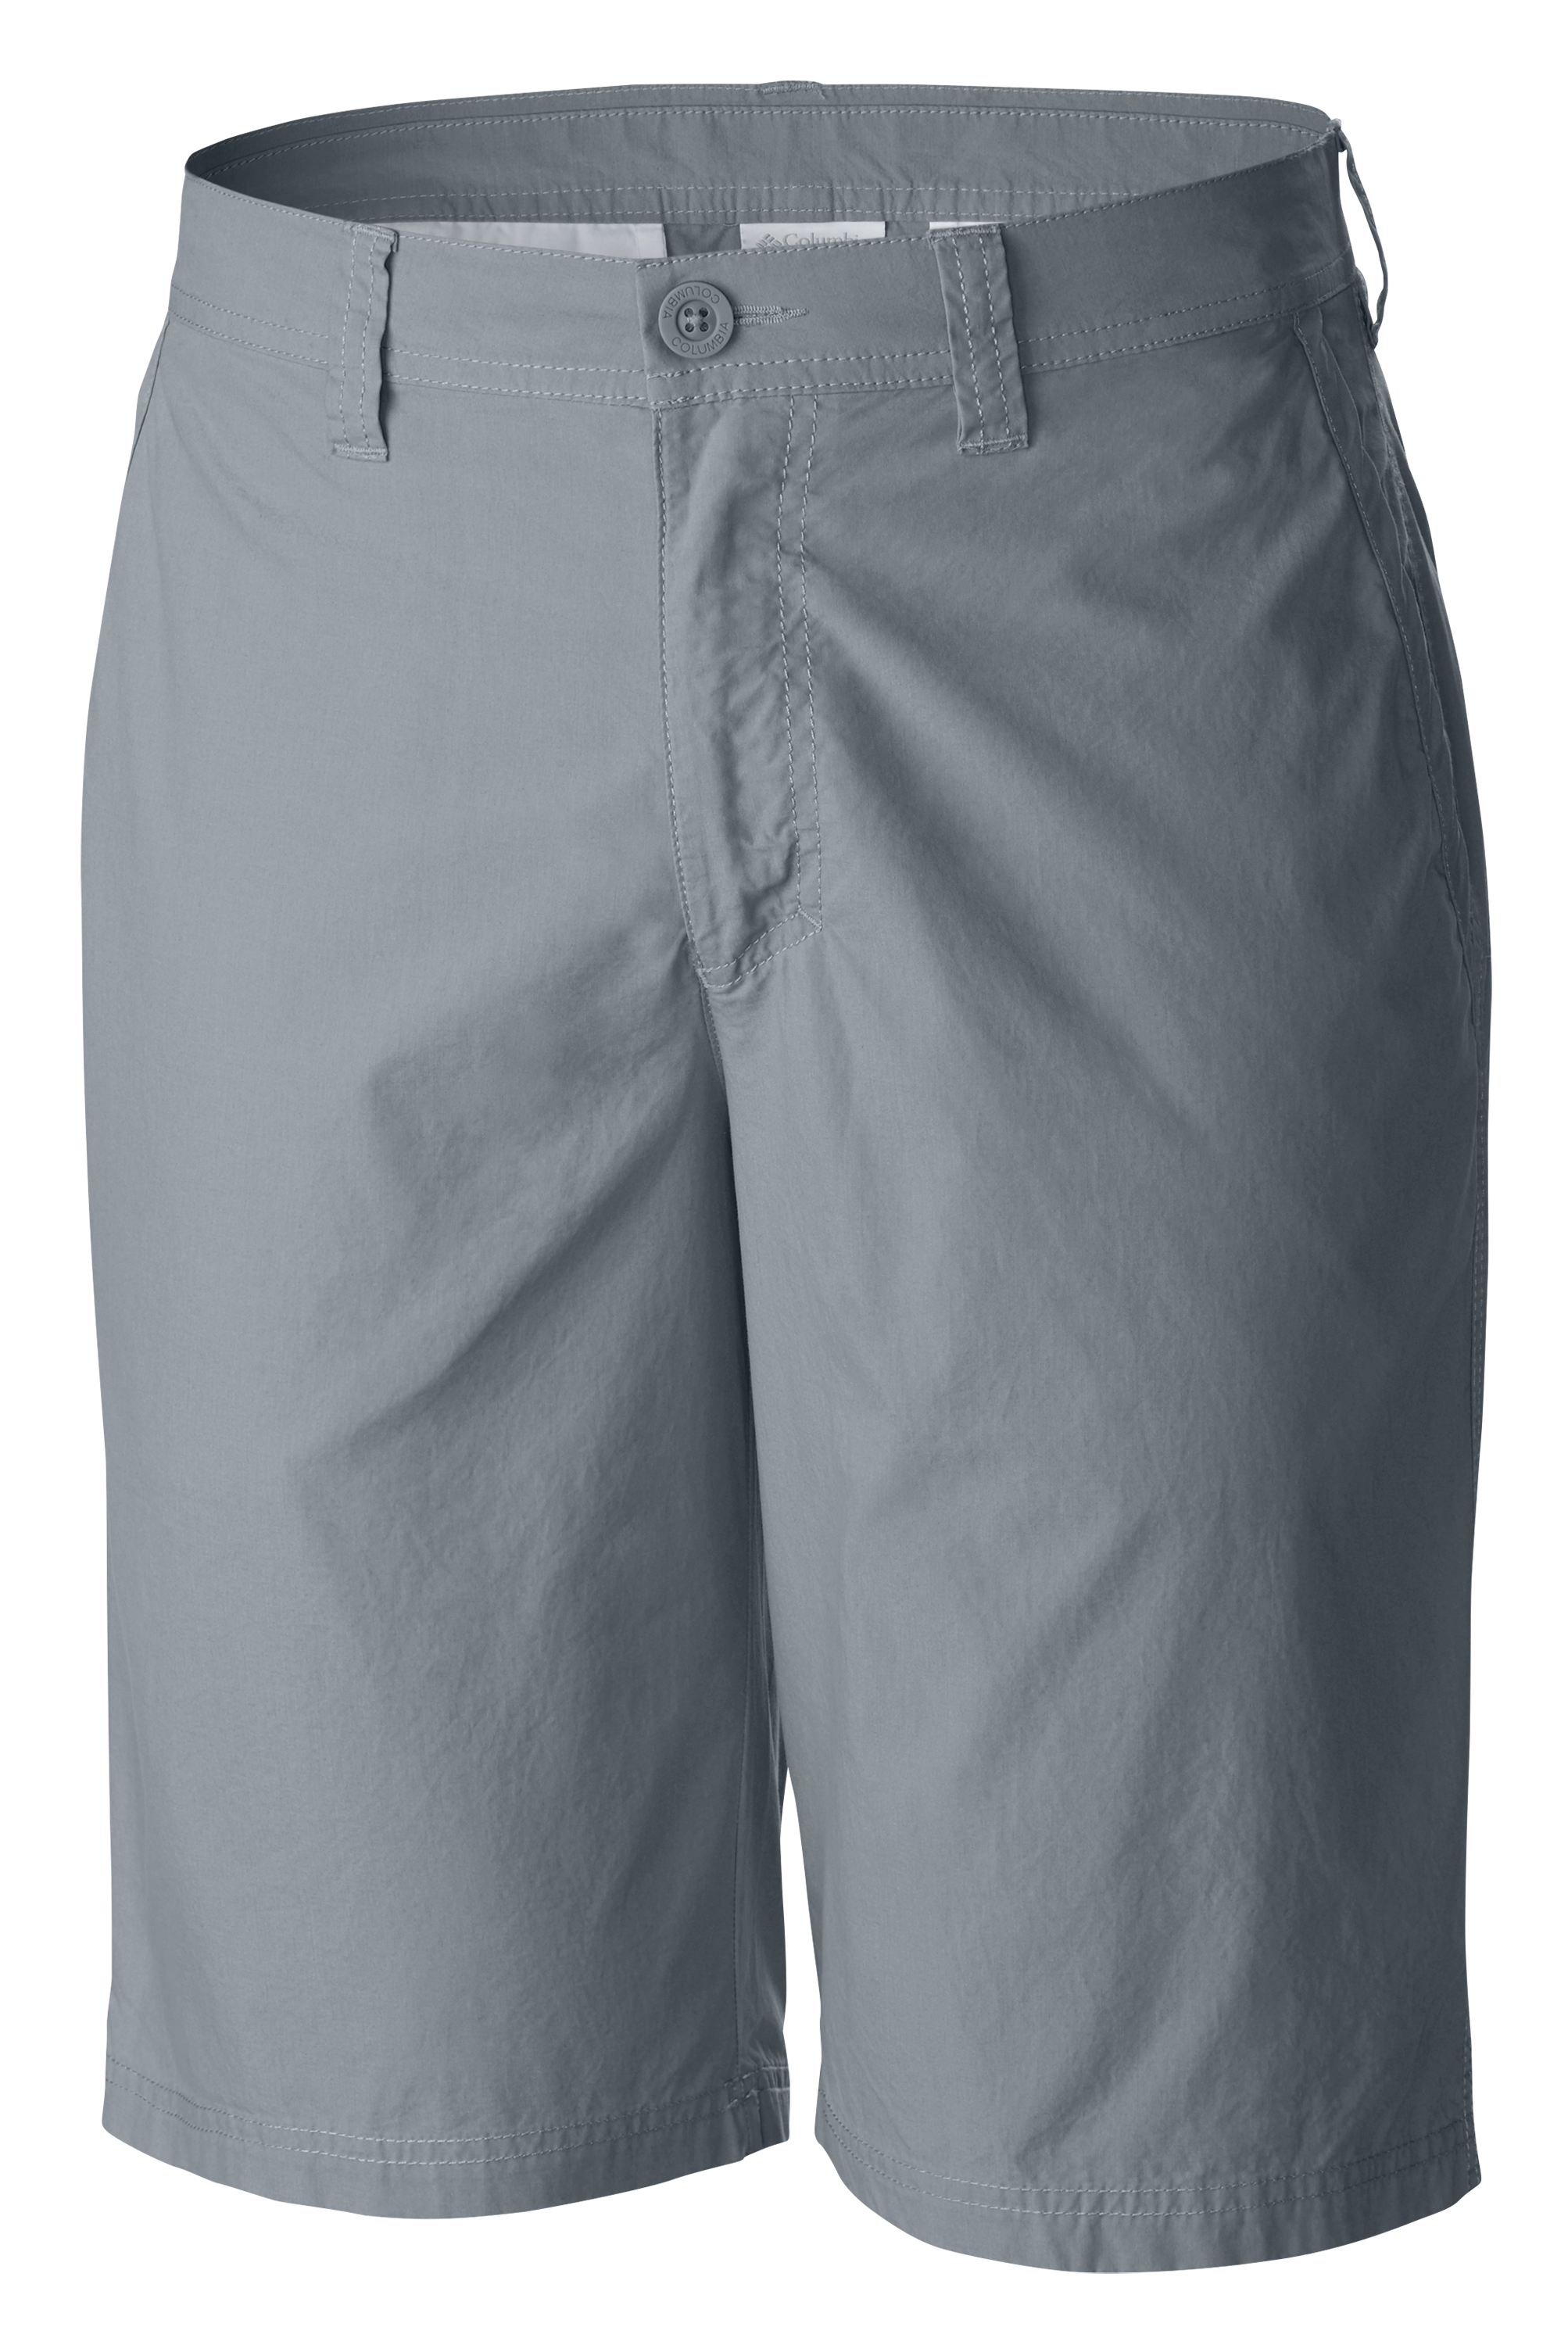 Columbia Washed Out Shorts for Men | Cabela's